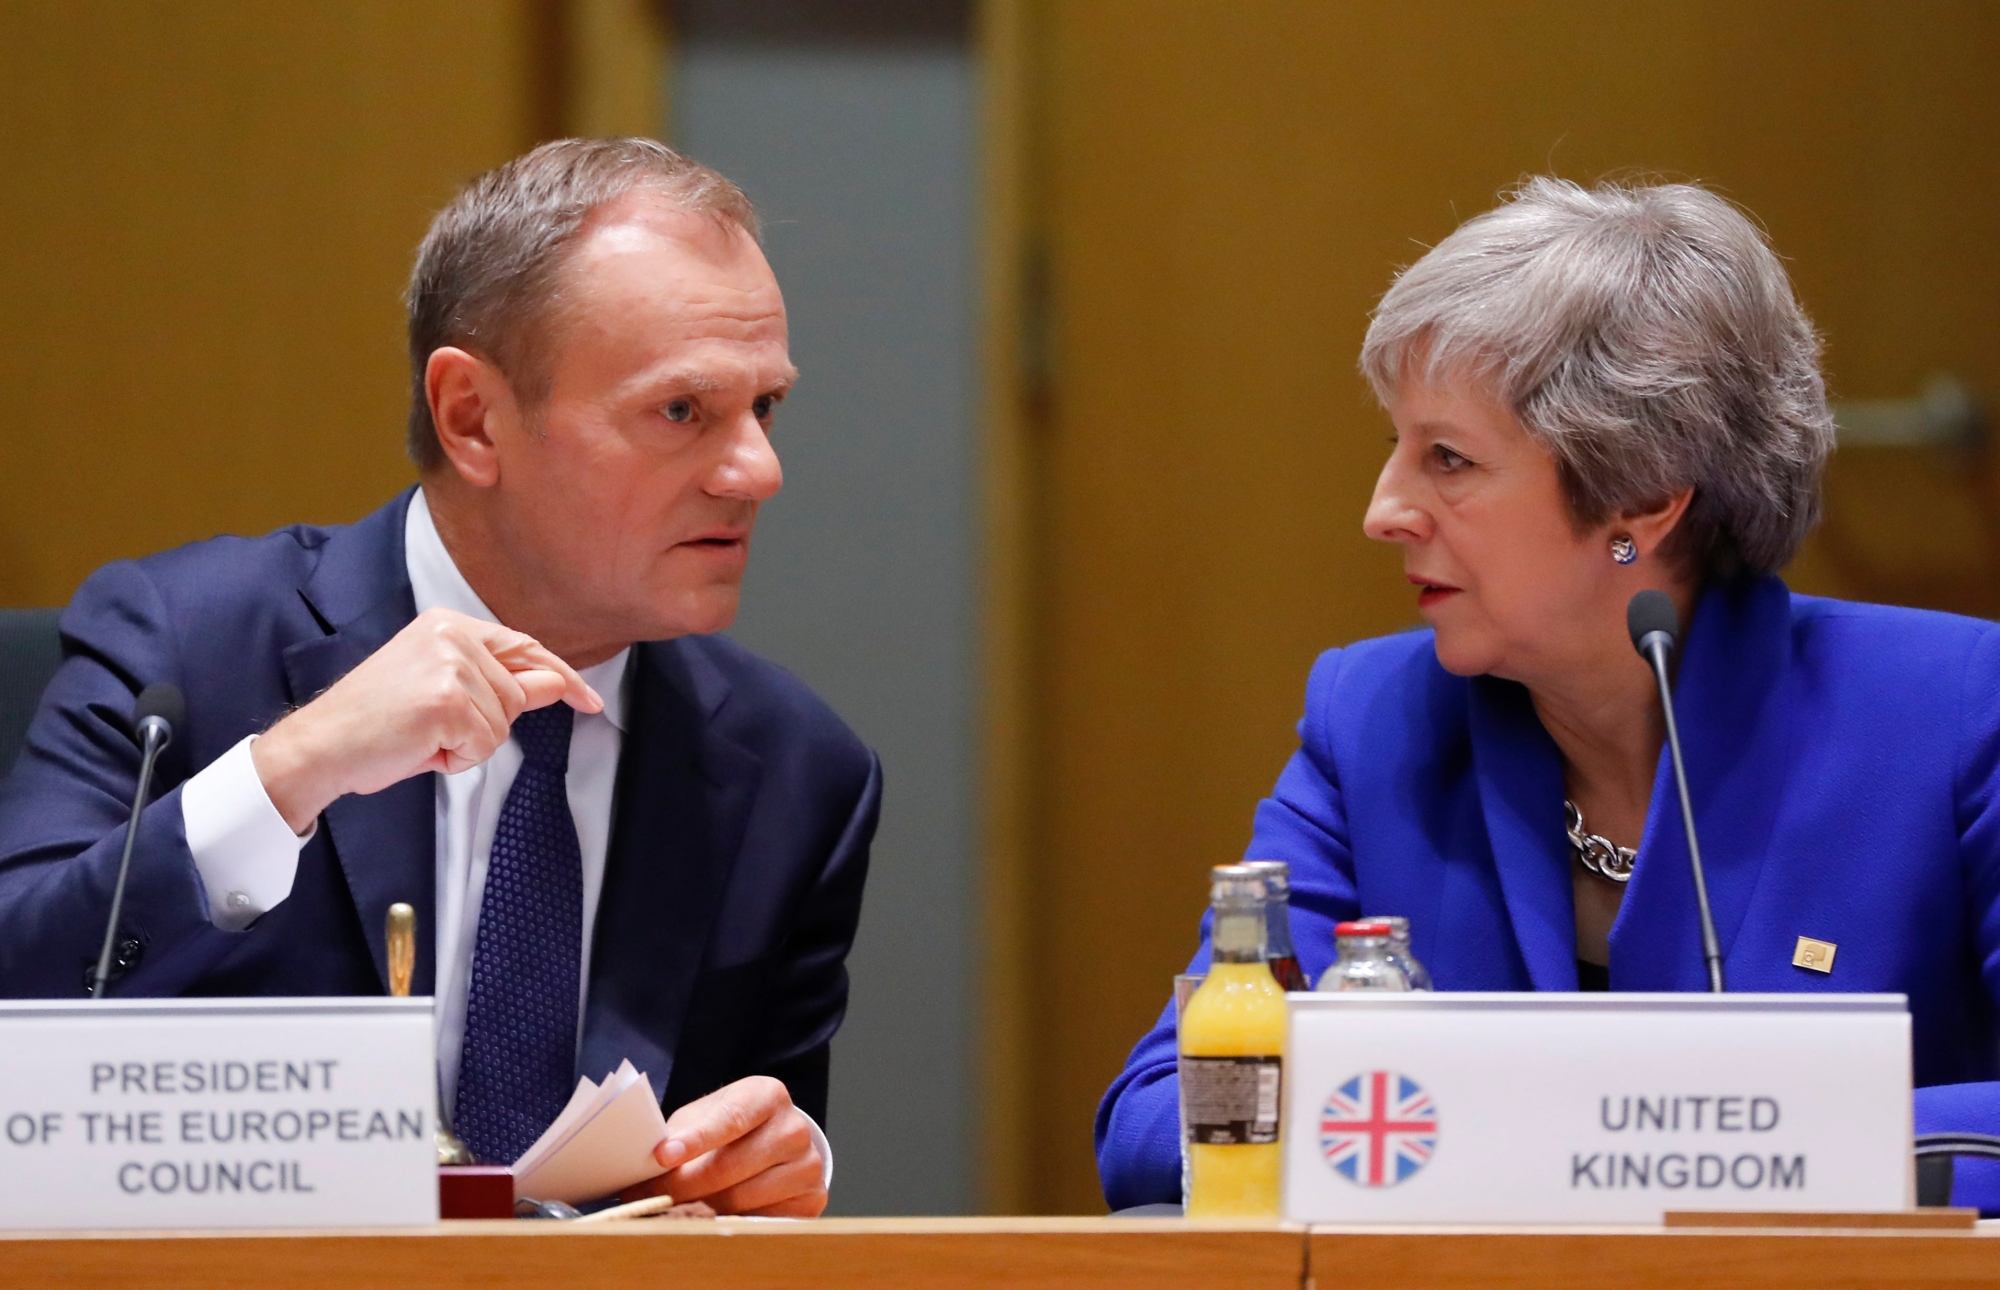 epa07486178 (FILE) - British Prime Minister Theresa May (R) and European Union Council President Donald Tusk (L) talk during the European council in Brussels, Belgium, 25 November 2018 (reissued 05 April 2019). Reports on 05 April 2019 state British Prime Minister Theresa May has written to European Council President Donald Tusk, requesting a delay until 30 June to Brexit. The Brexit delay request comes ahead of a EU leaders summit on 10 April.  EPA/OLIVIER HOSLET / POOL (FILE) BELGIUM EU BRITAIN BREXIT